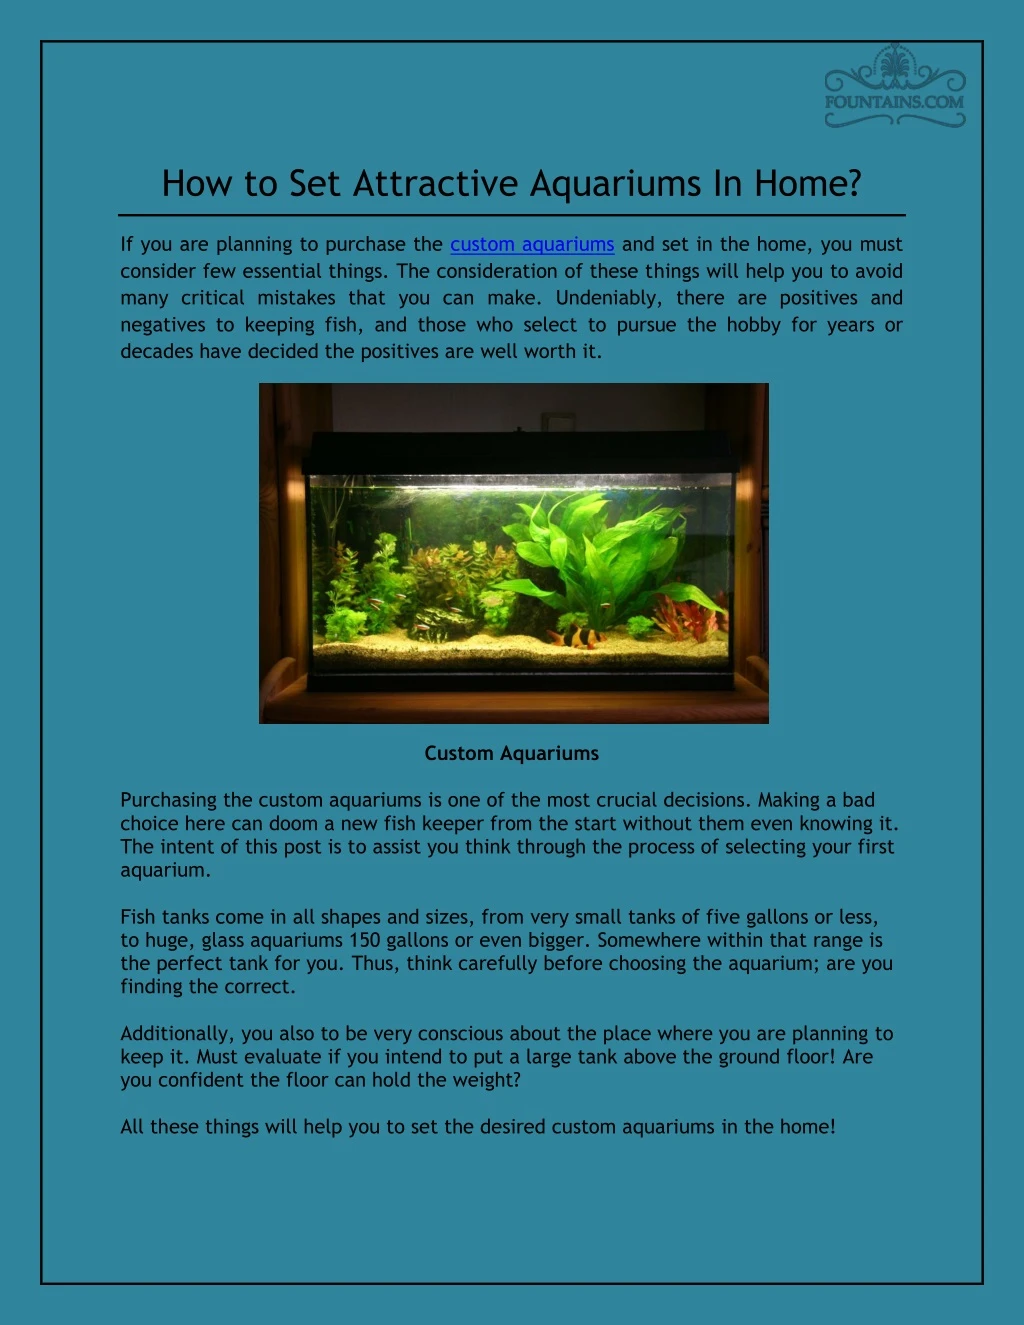 how to set attractive aquariums in home